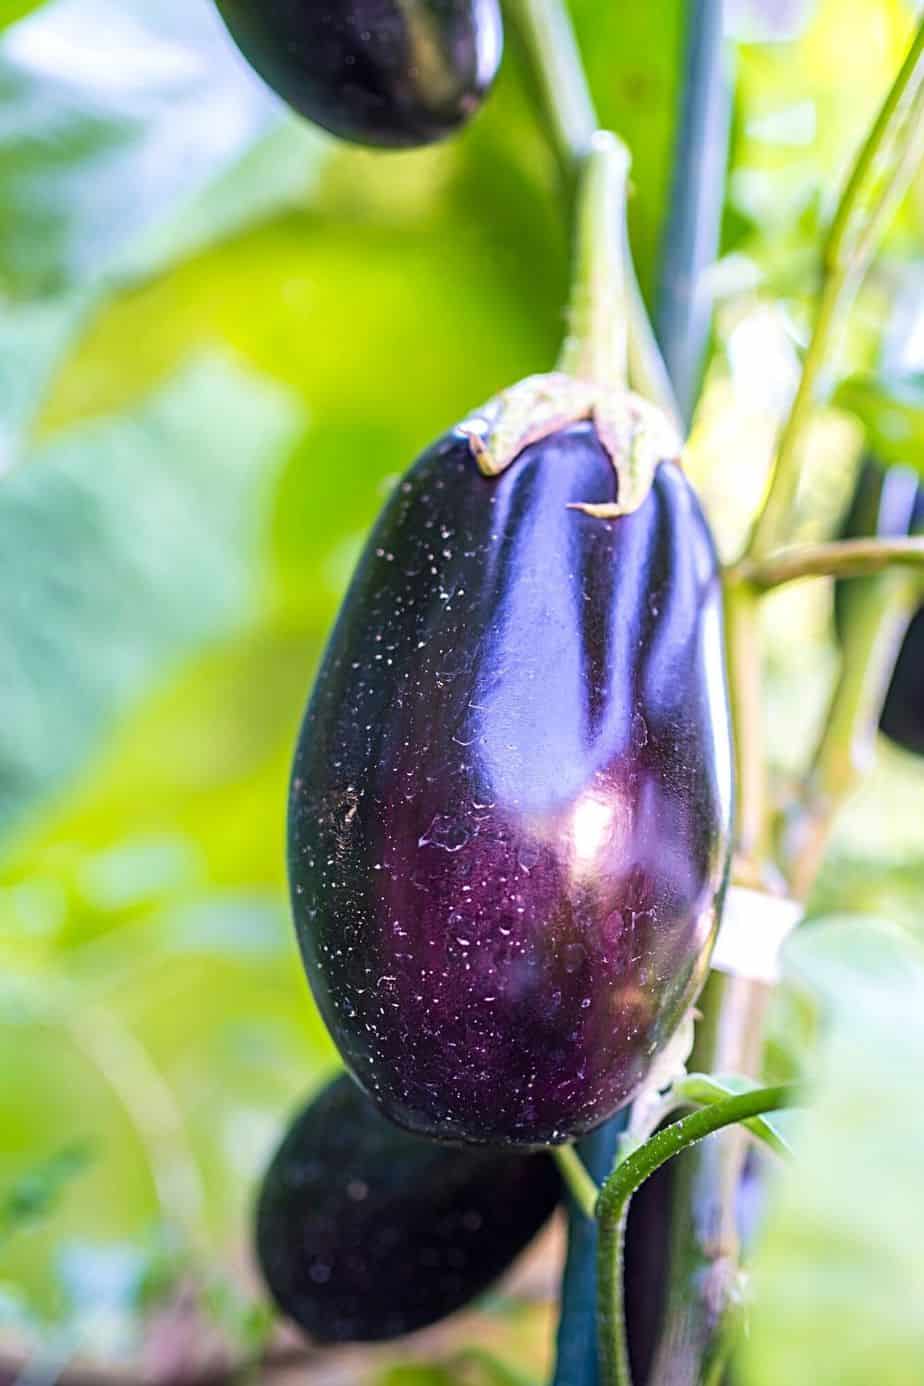 Adding to the list of edible plants you can grow on a south-facing balcony is the Eggplant